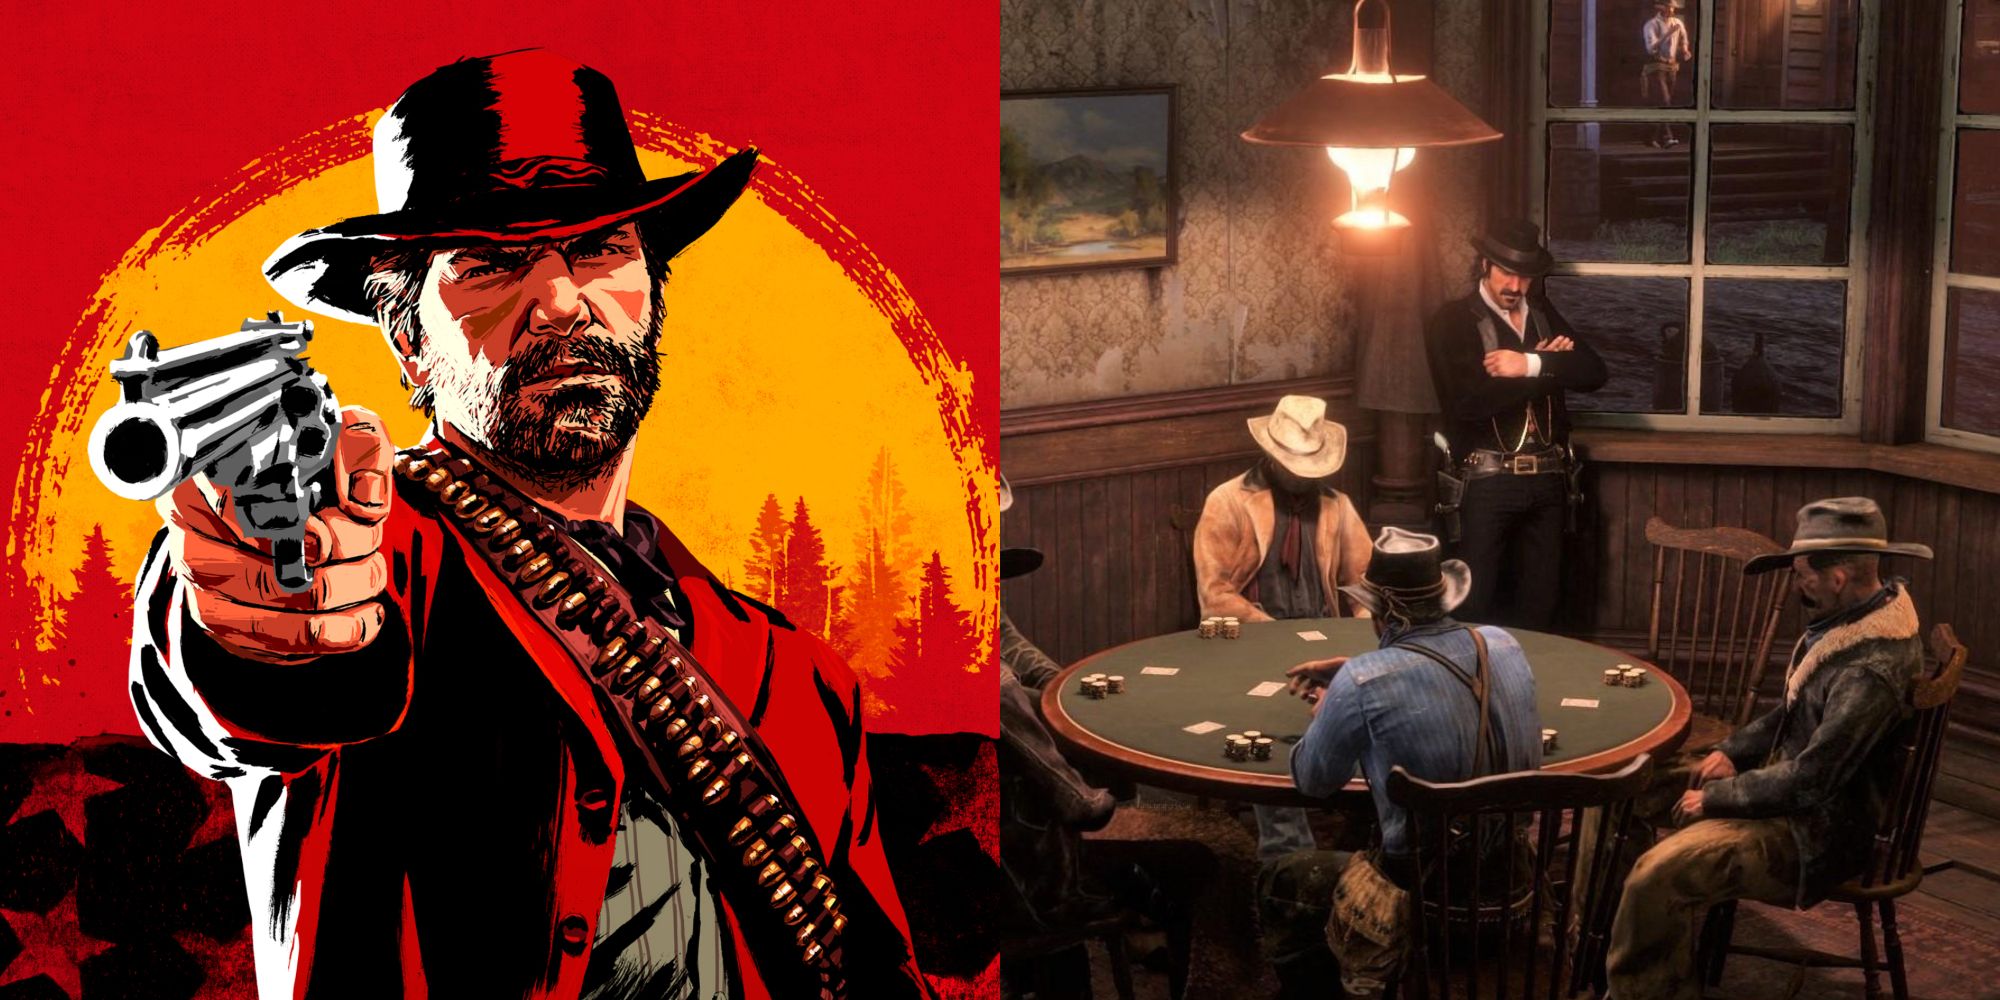 A split image of the Red Dead Redemption 2 cover art, which features Arthur Morgan holding a revolver, and a photo of men playing poker in Valentine.